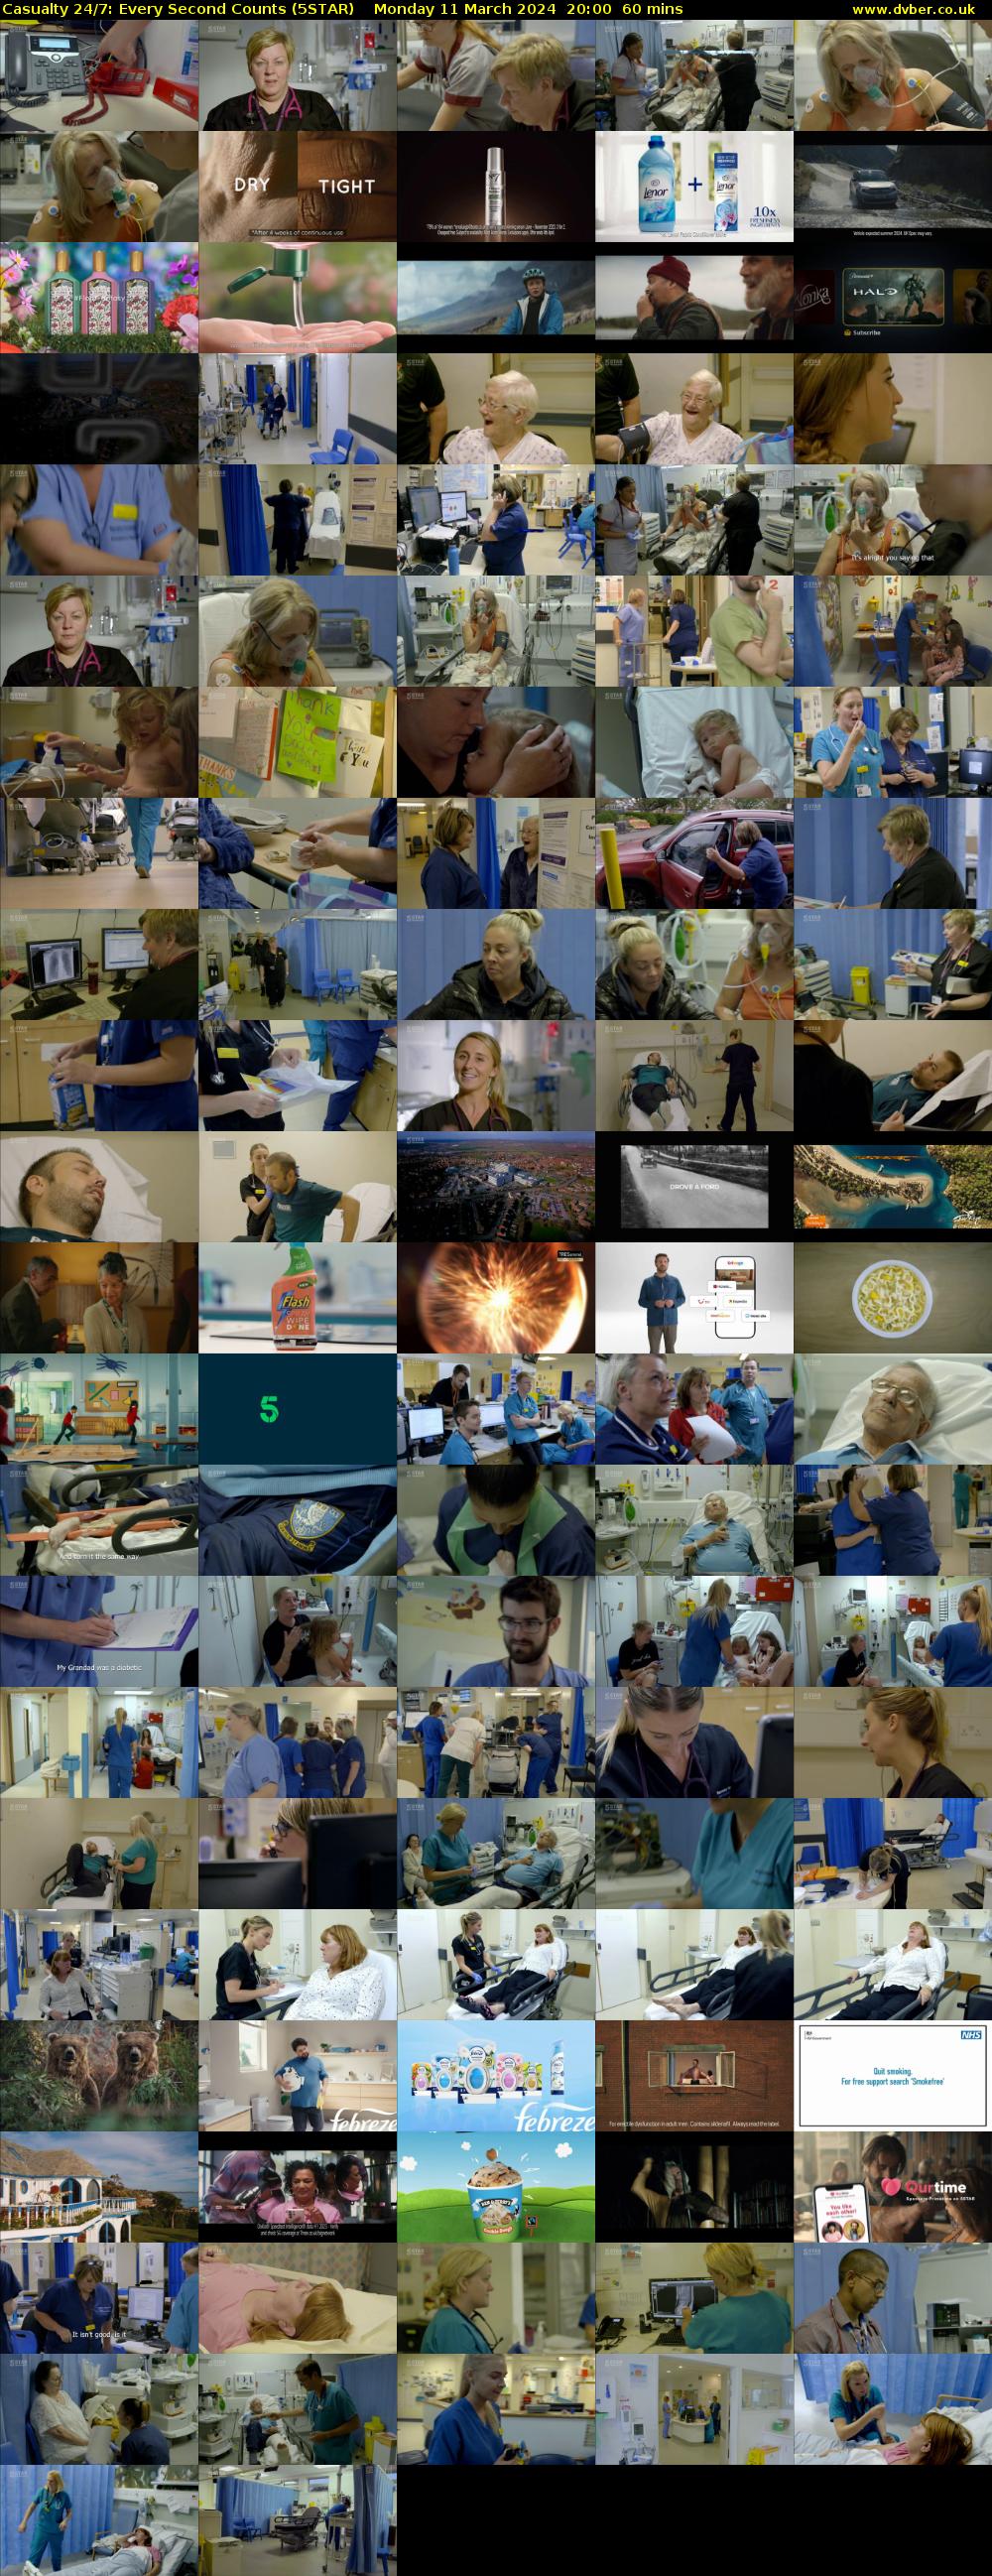 Casualty 24/7: Every Second Counts (5STAR) Monday 11 March 2024 20:00 - 21:00